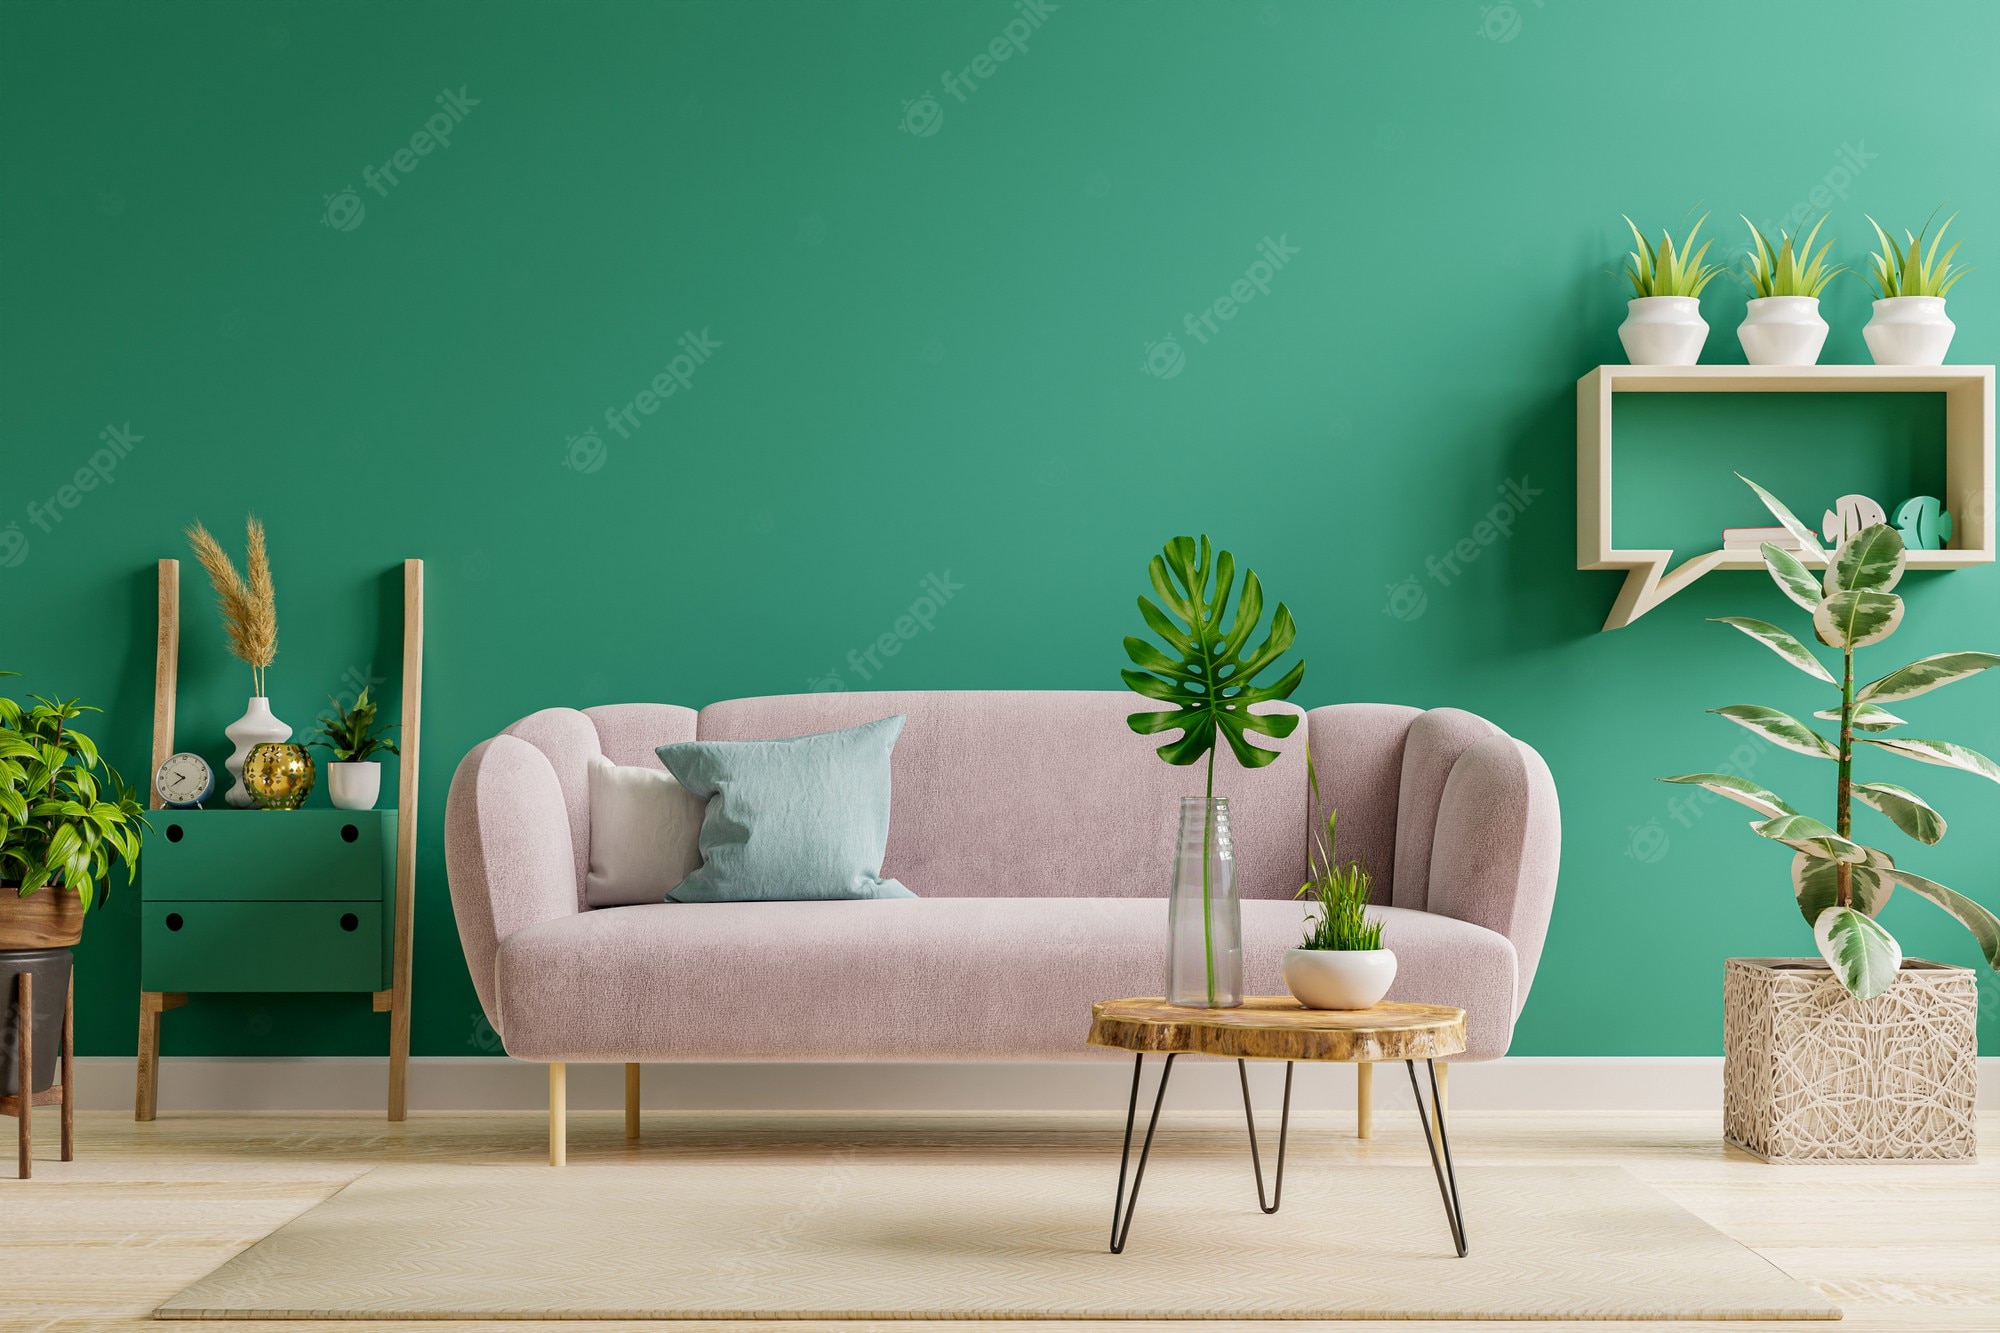 green-interior-modern-interior-living-room-style-with-soft-sofa-green-wall-3d-rendering_41470-3902